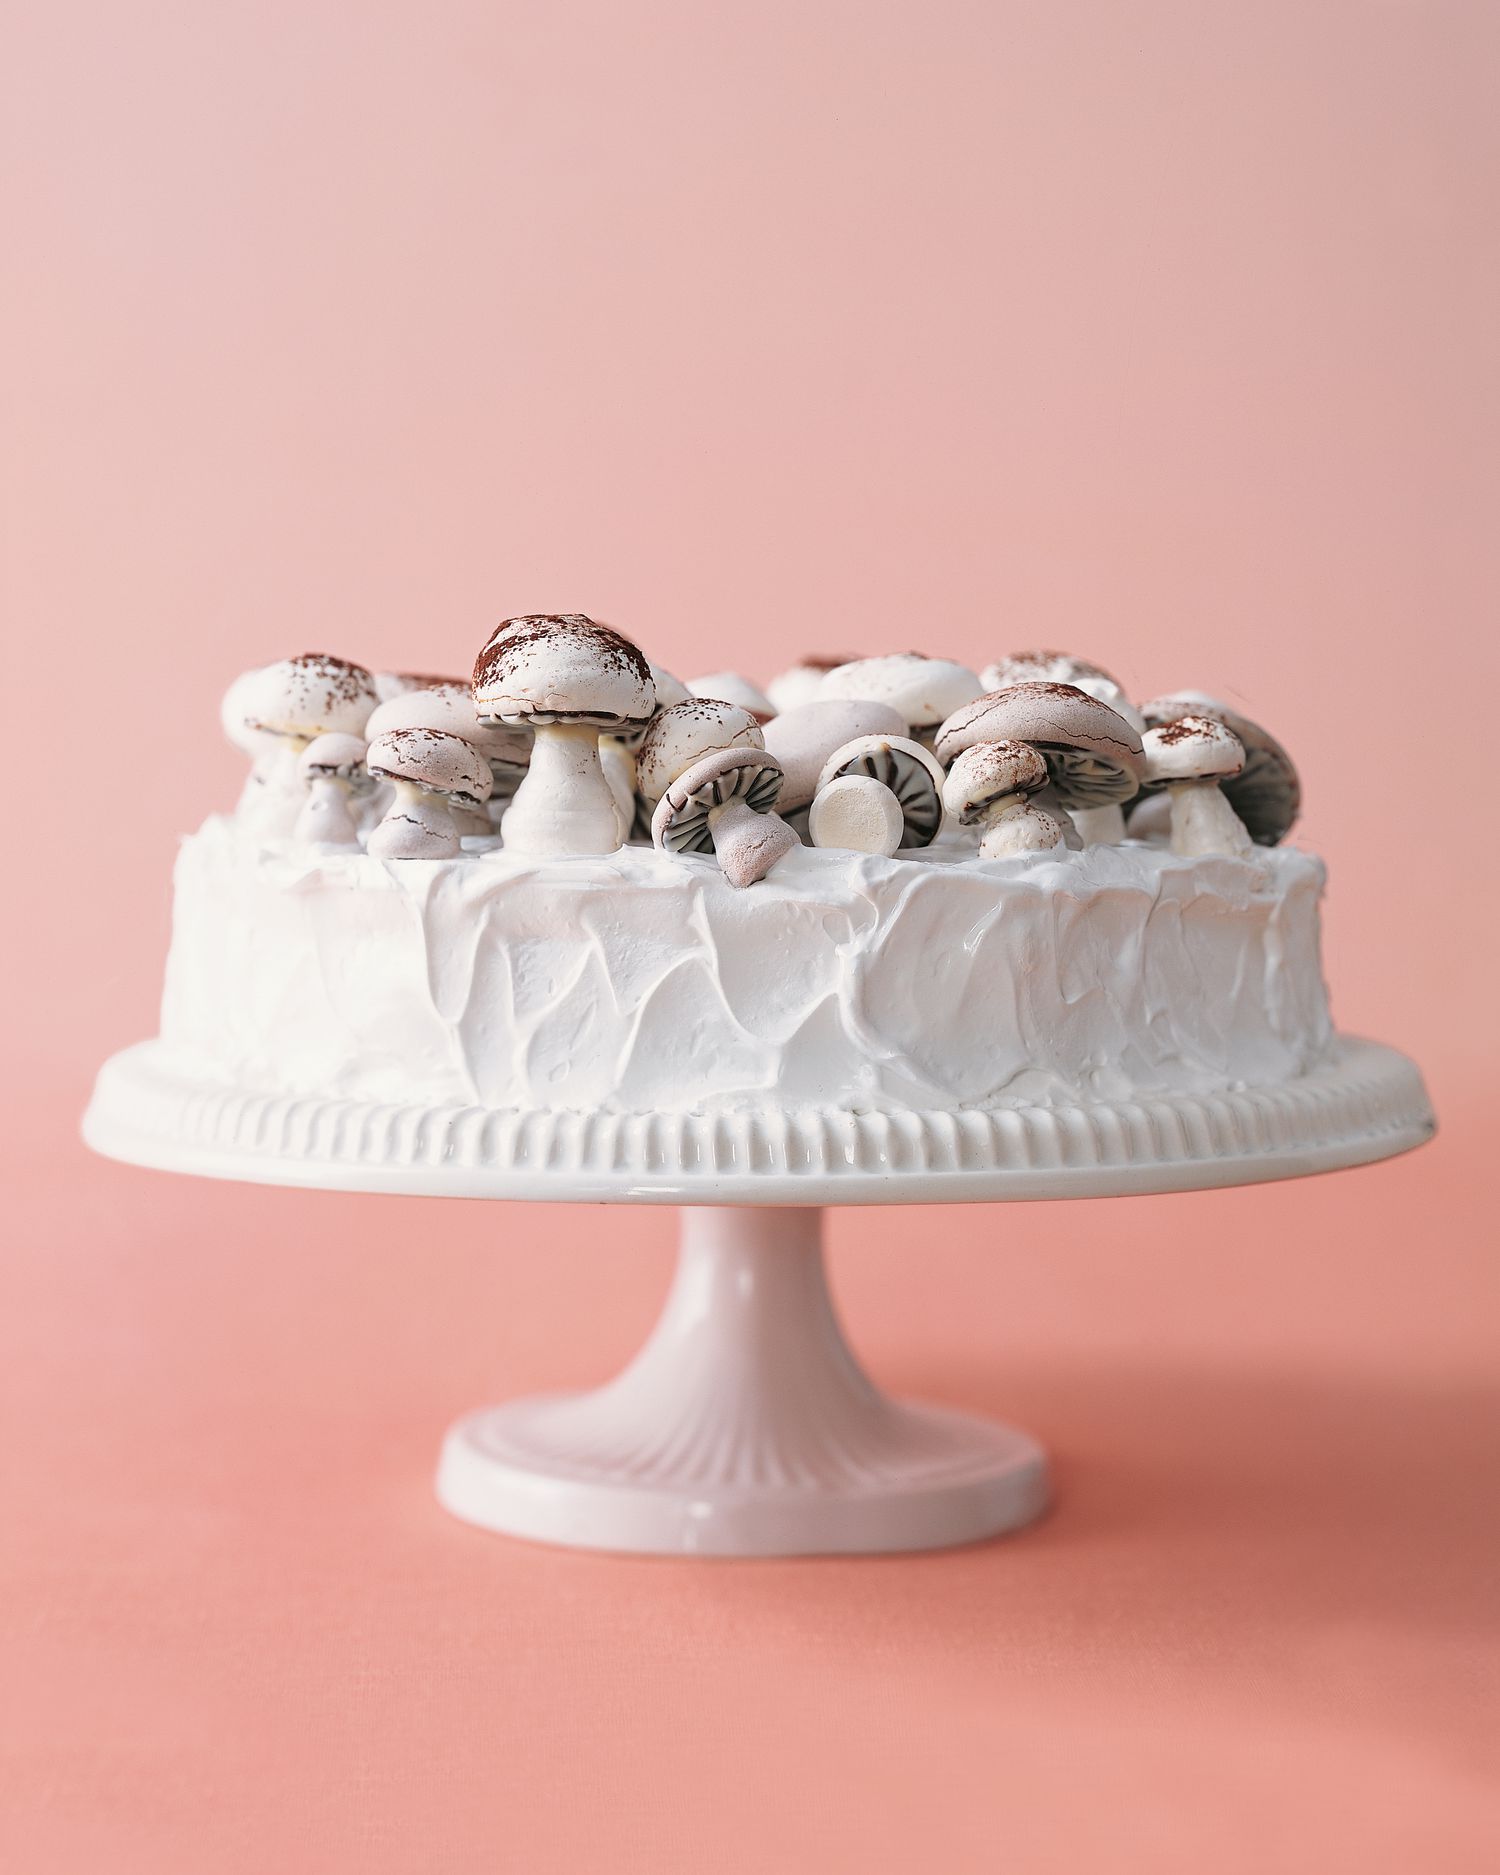 Frosted Fruitcake with Meringue Mushrooms